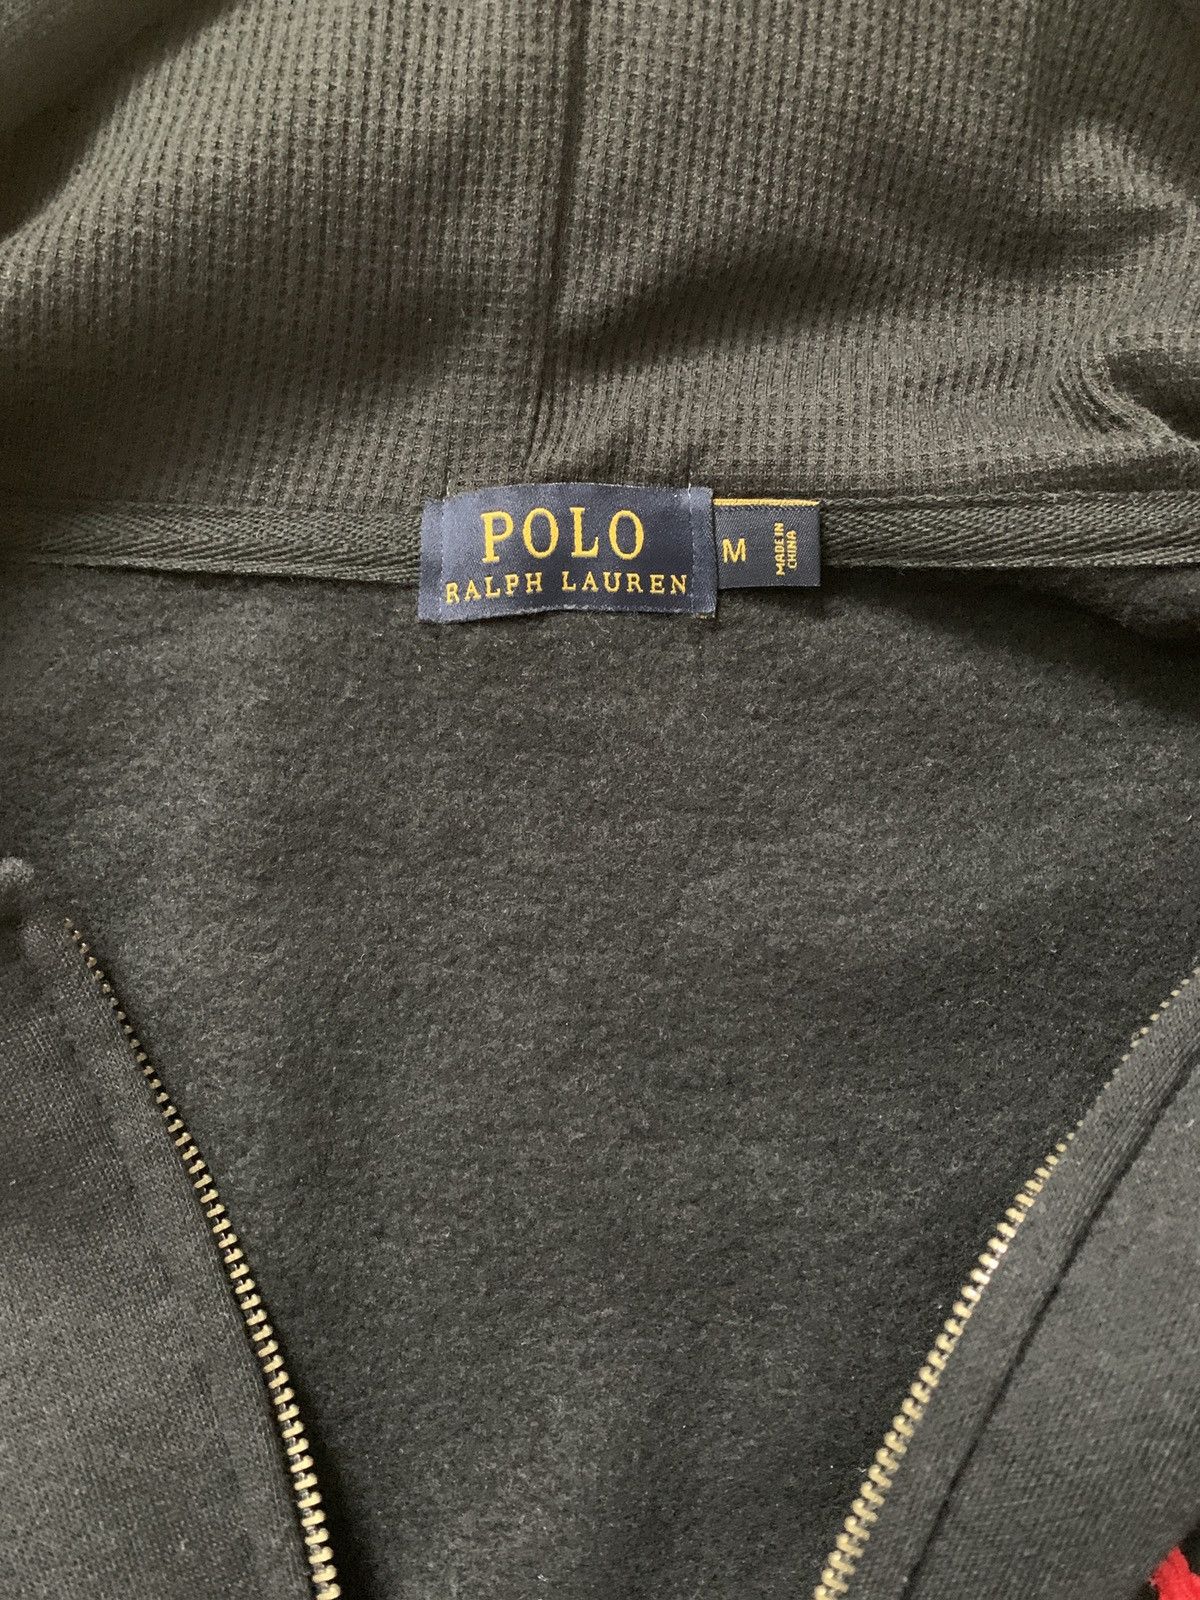 Polo Ralph Lauren Polo Zip Up Hoodie Size US M / EU 48-50 / 2 - 2 Preview